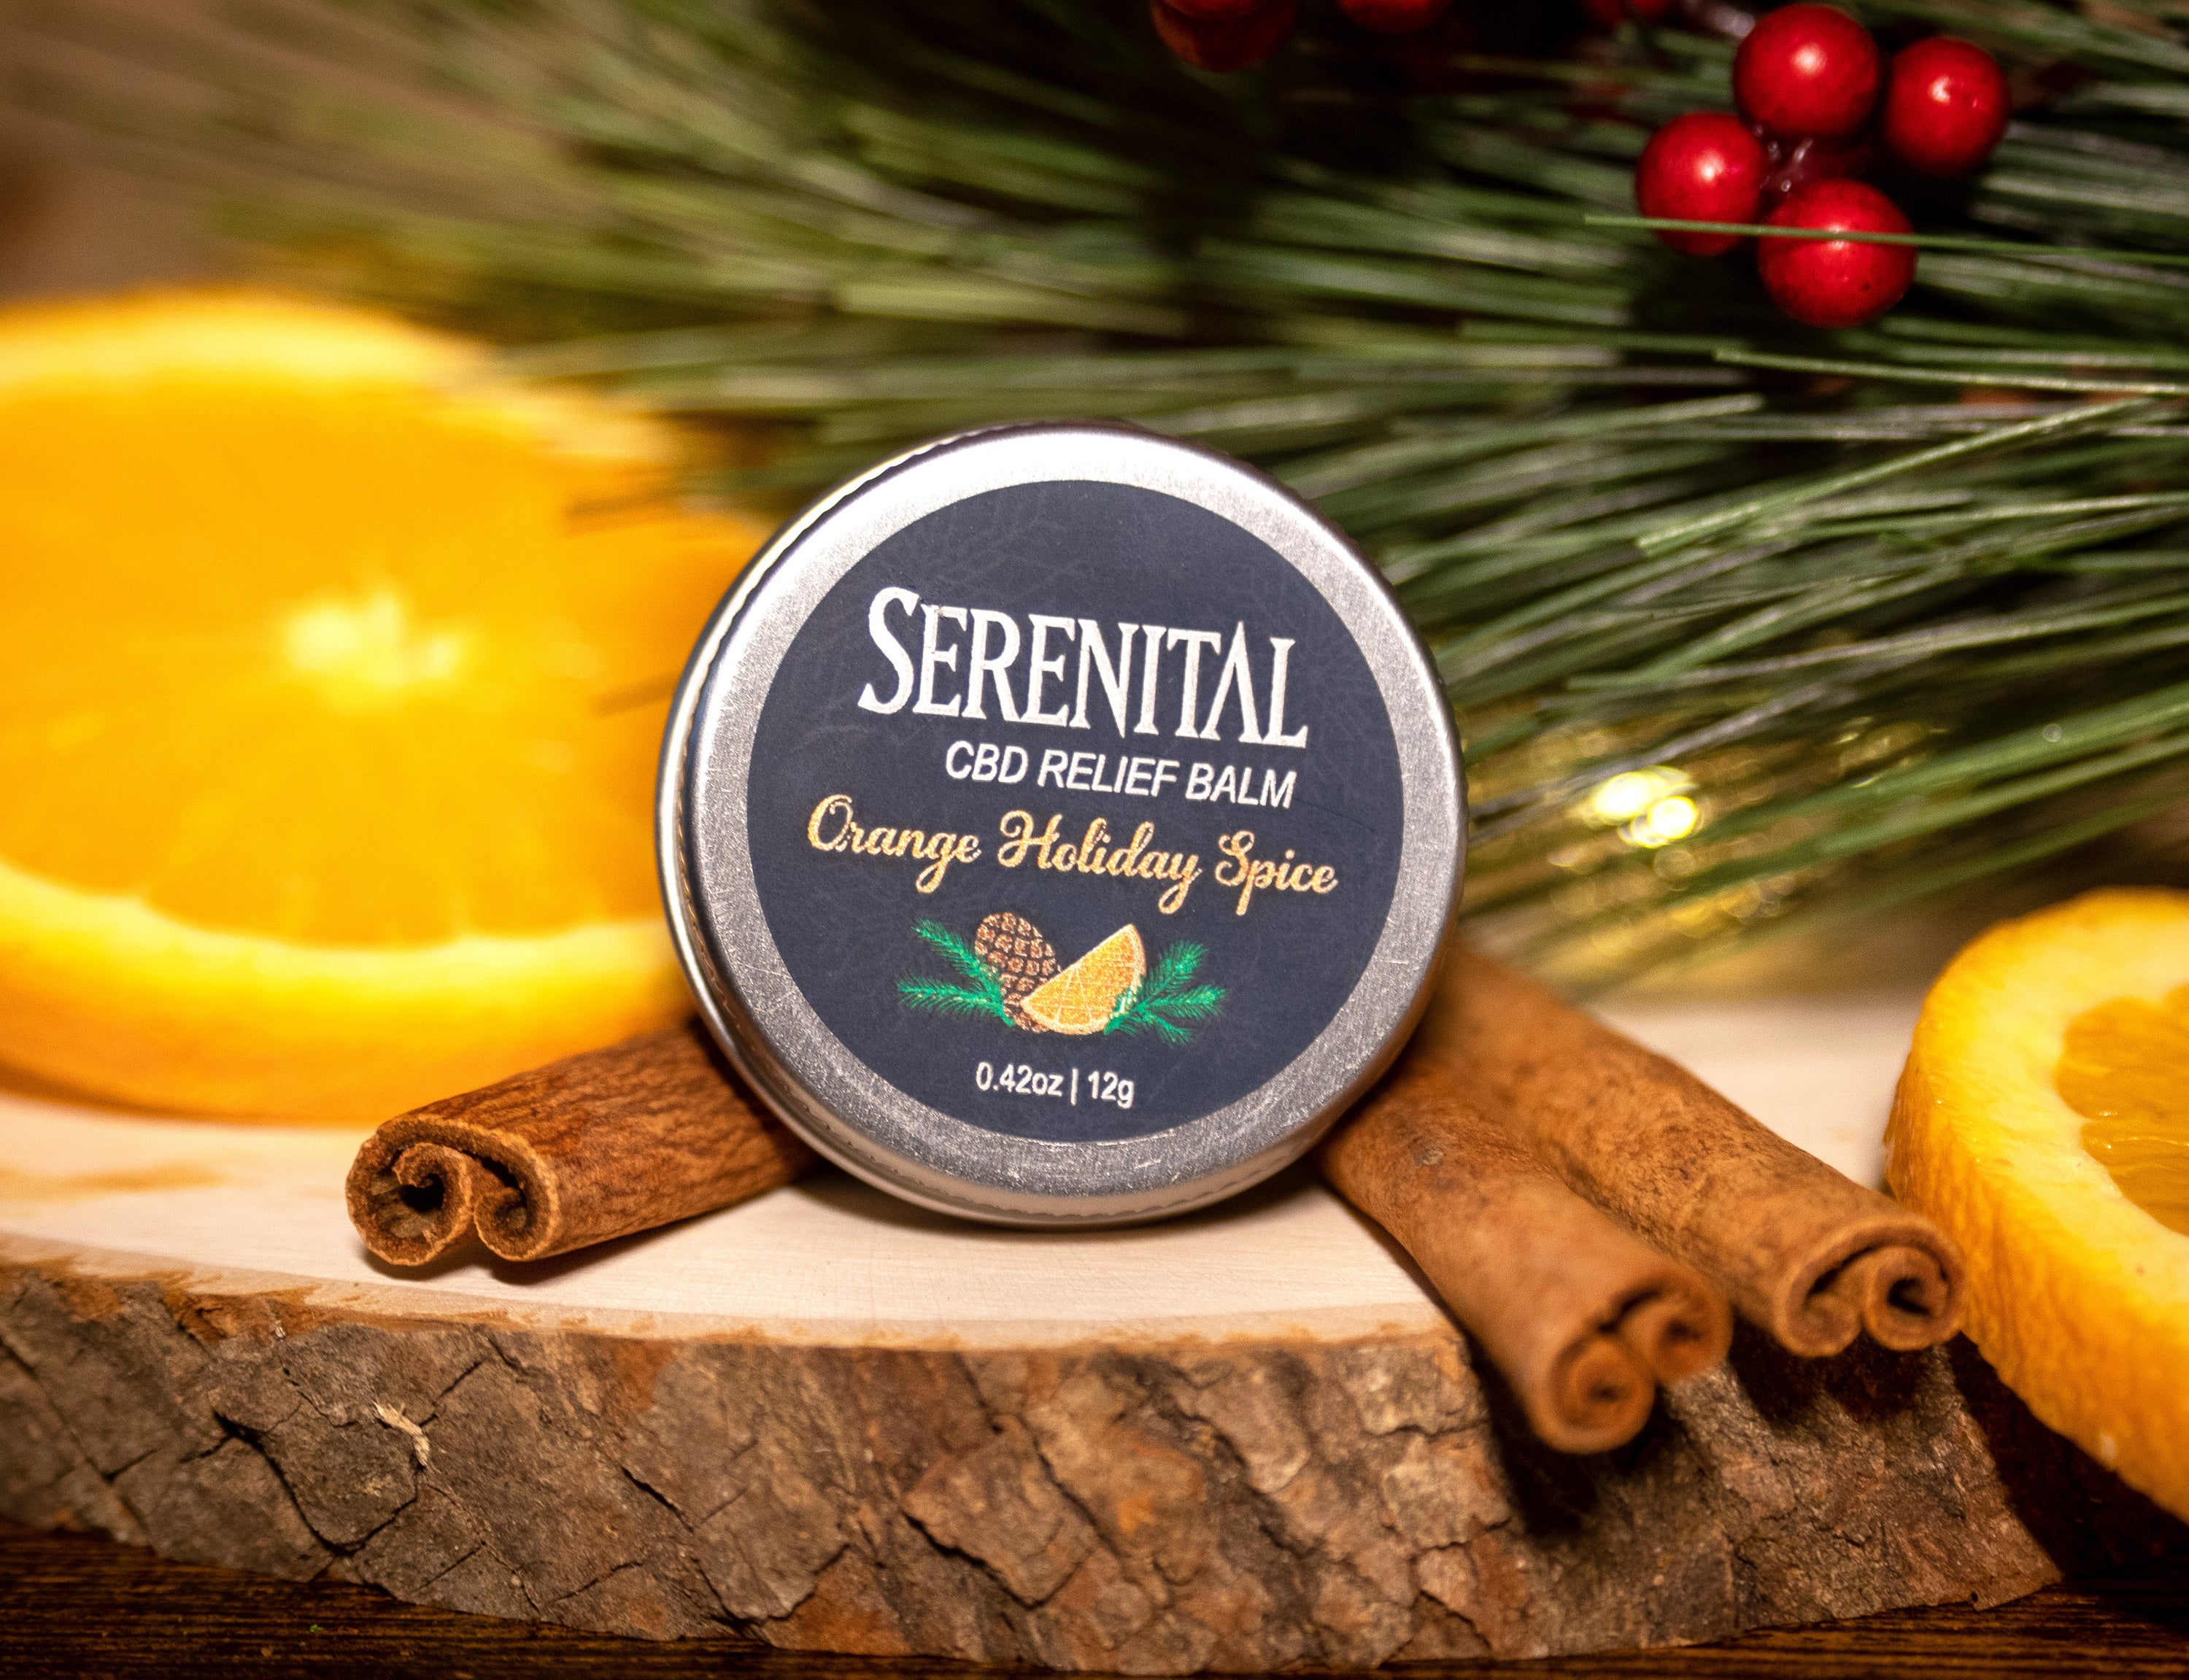 Serenital's limited release Orange Holiday Spice CBD relief balm is shown with some orange slices, cinnamon sticks, and pine needles.